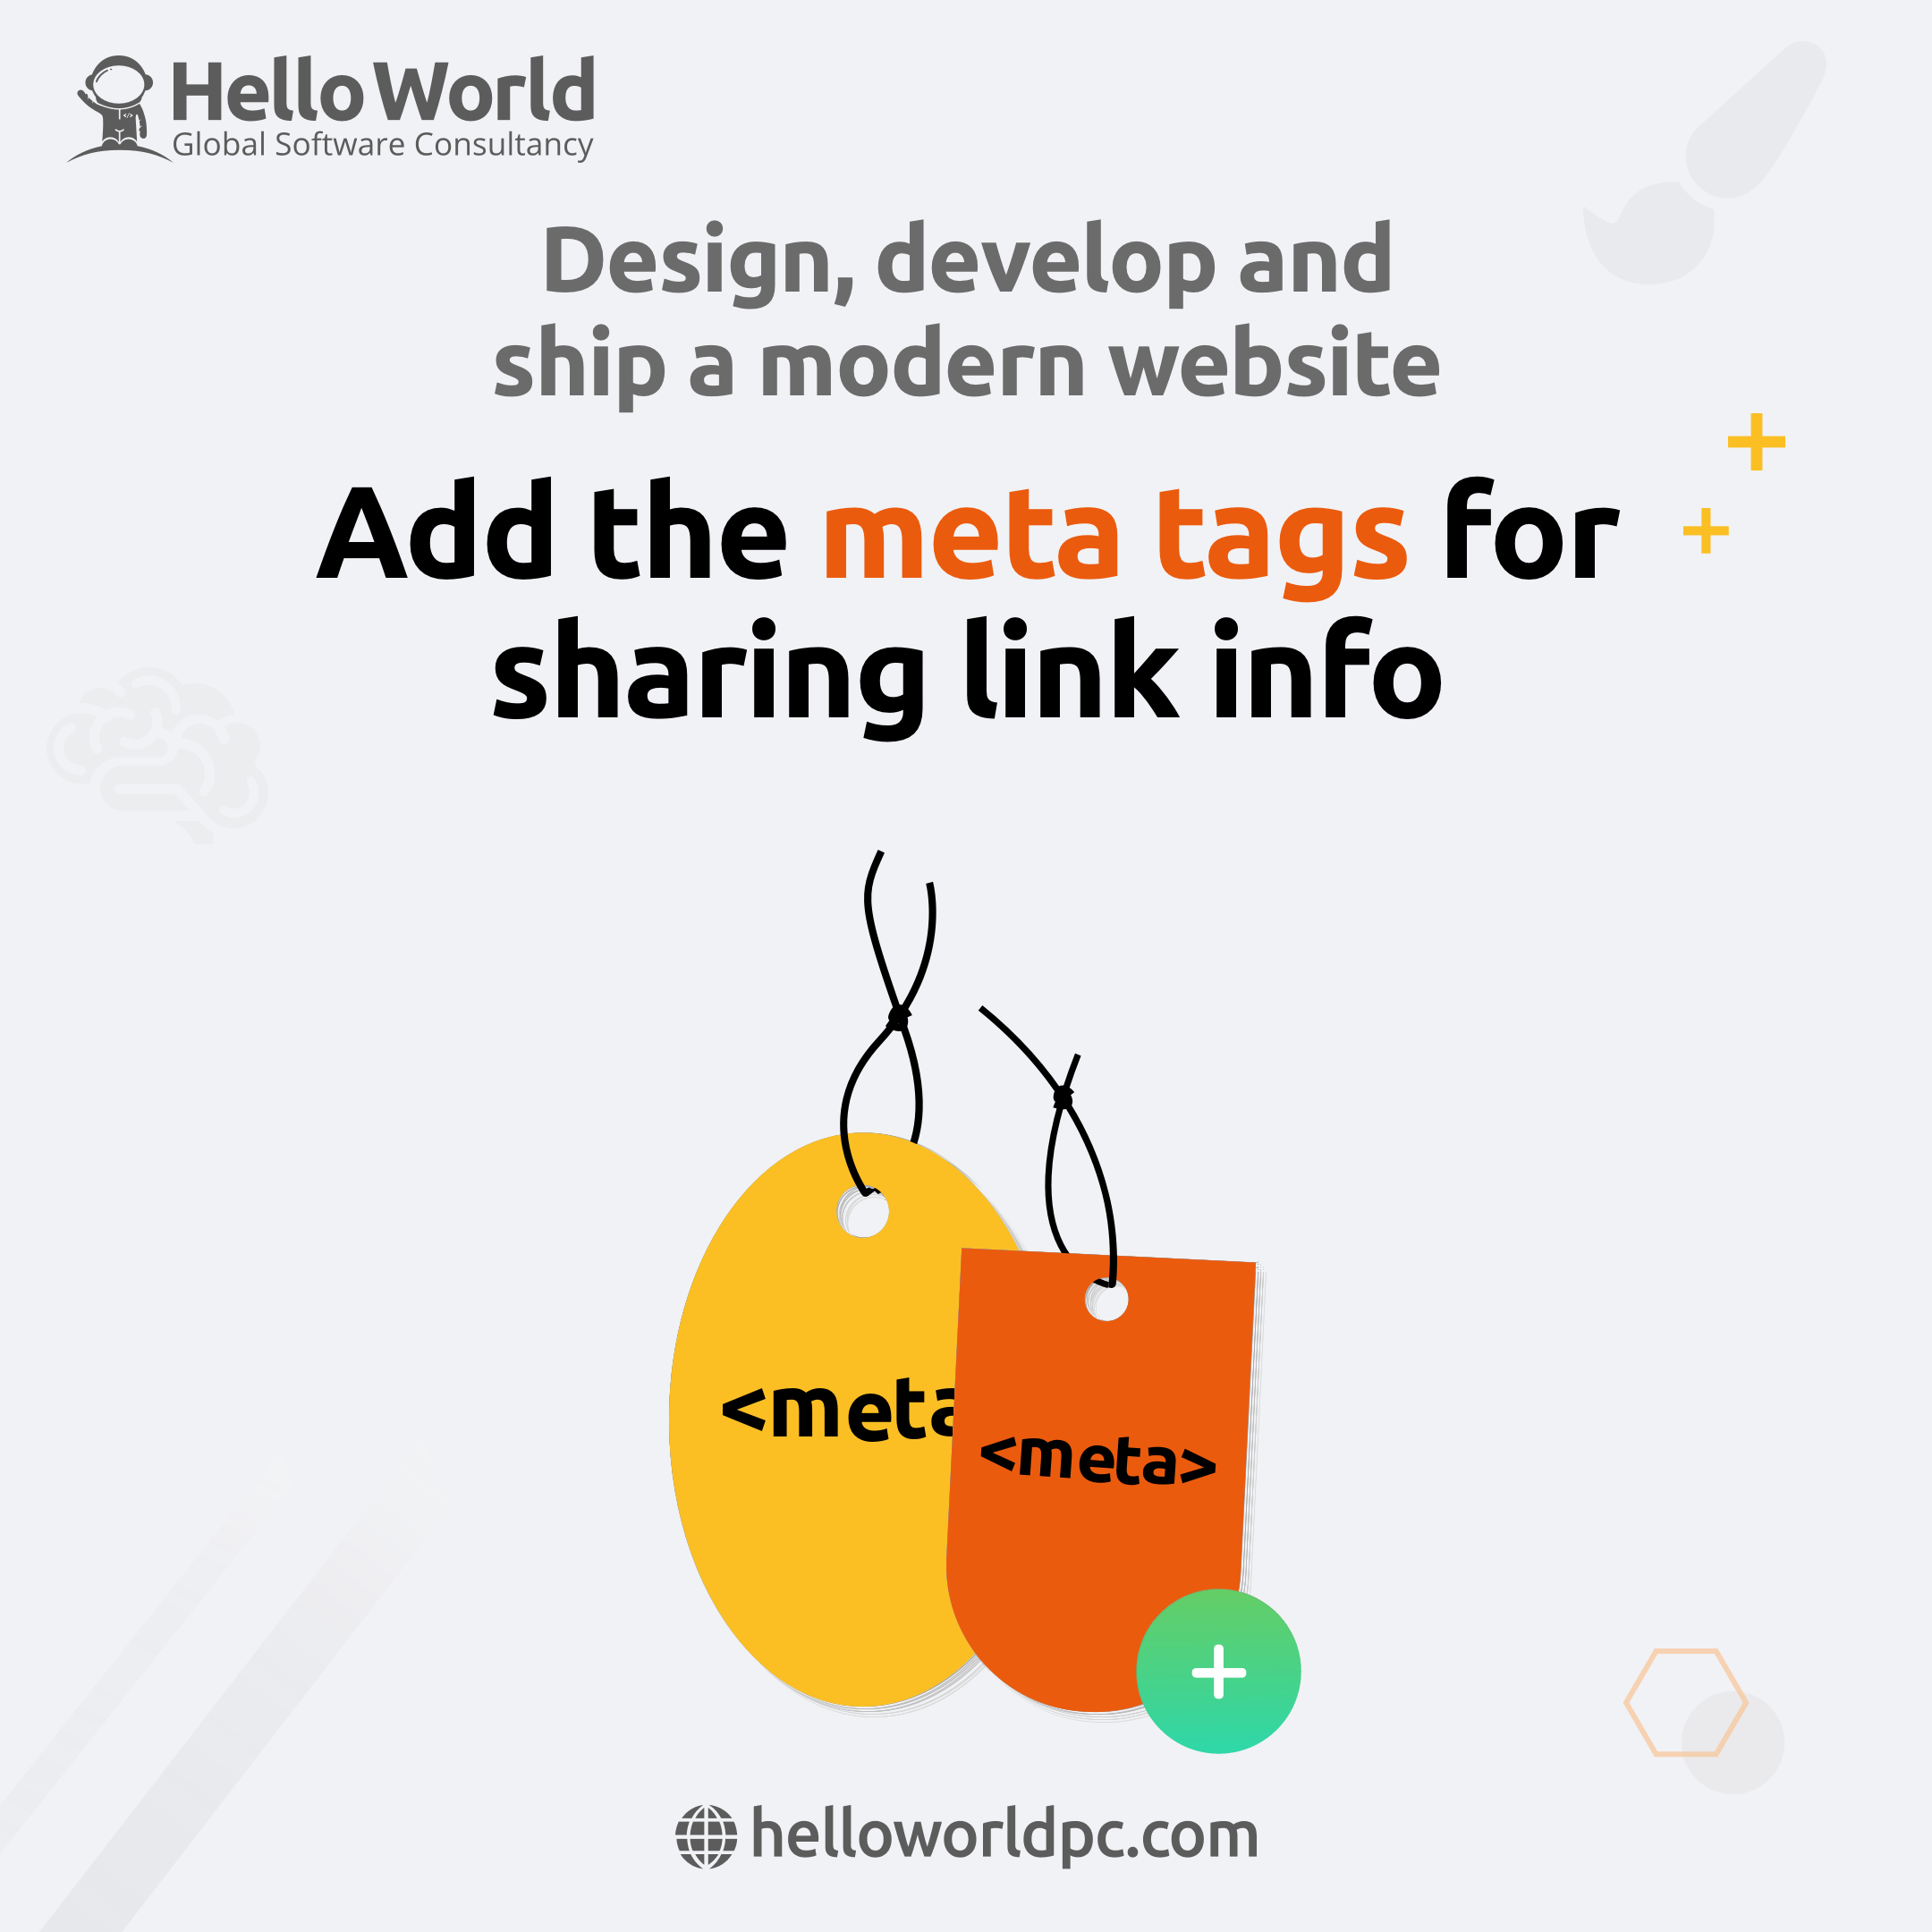 Modern Website: Add the meta tags for sharing link info